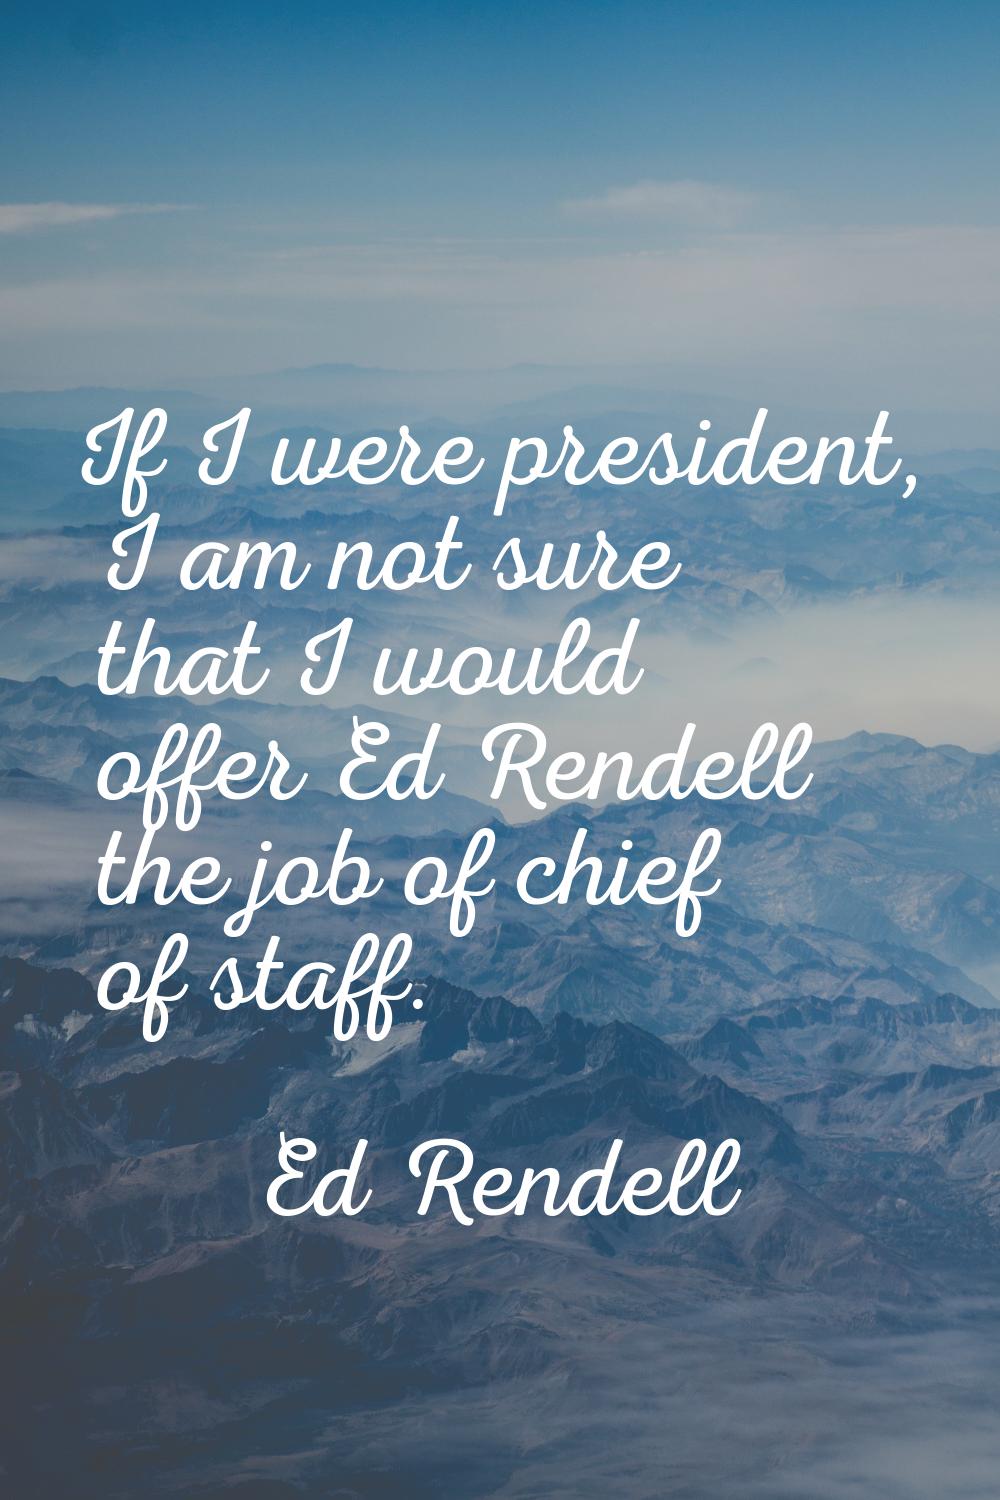 If I were president, I am not sure that I would offer Ed Rendell the job of chief of staff.